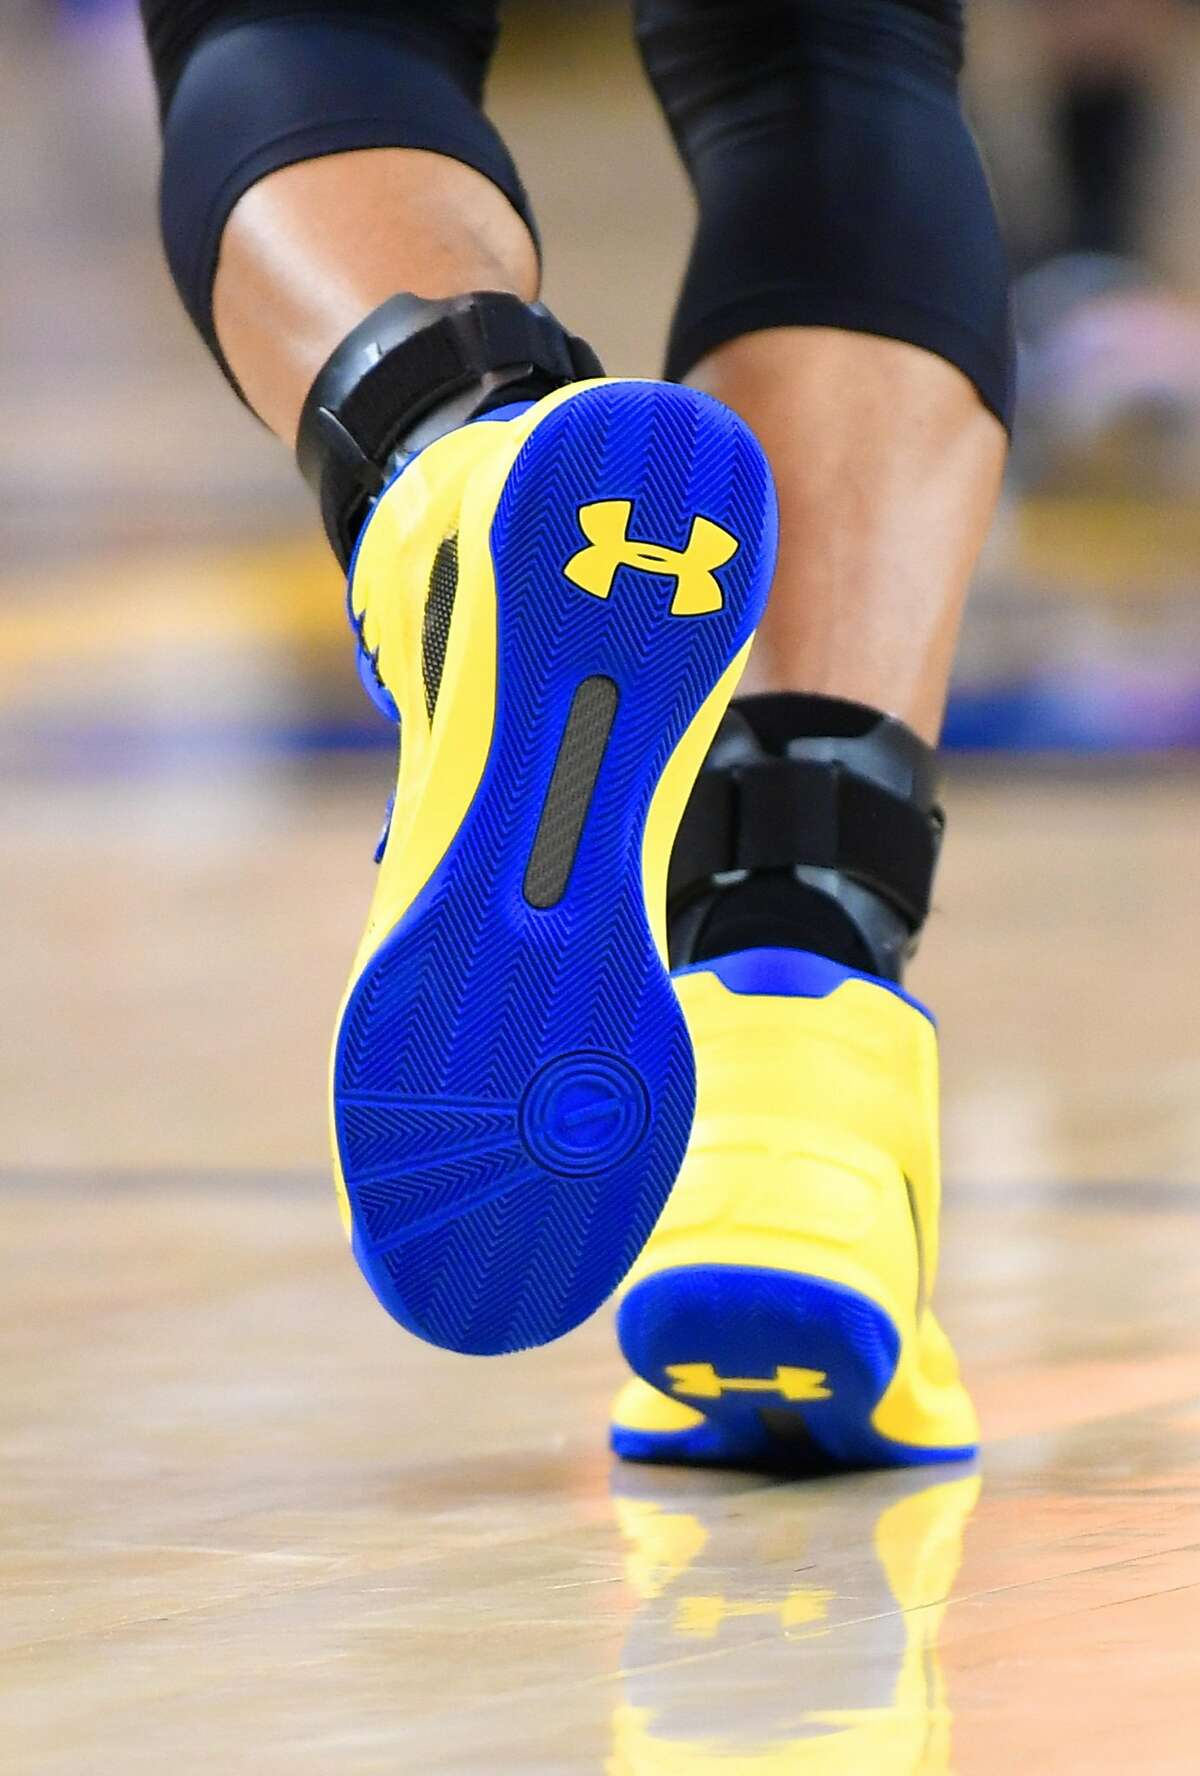 Under Armour disappointed with Curry 3 sales